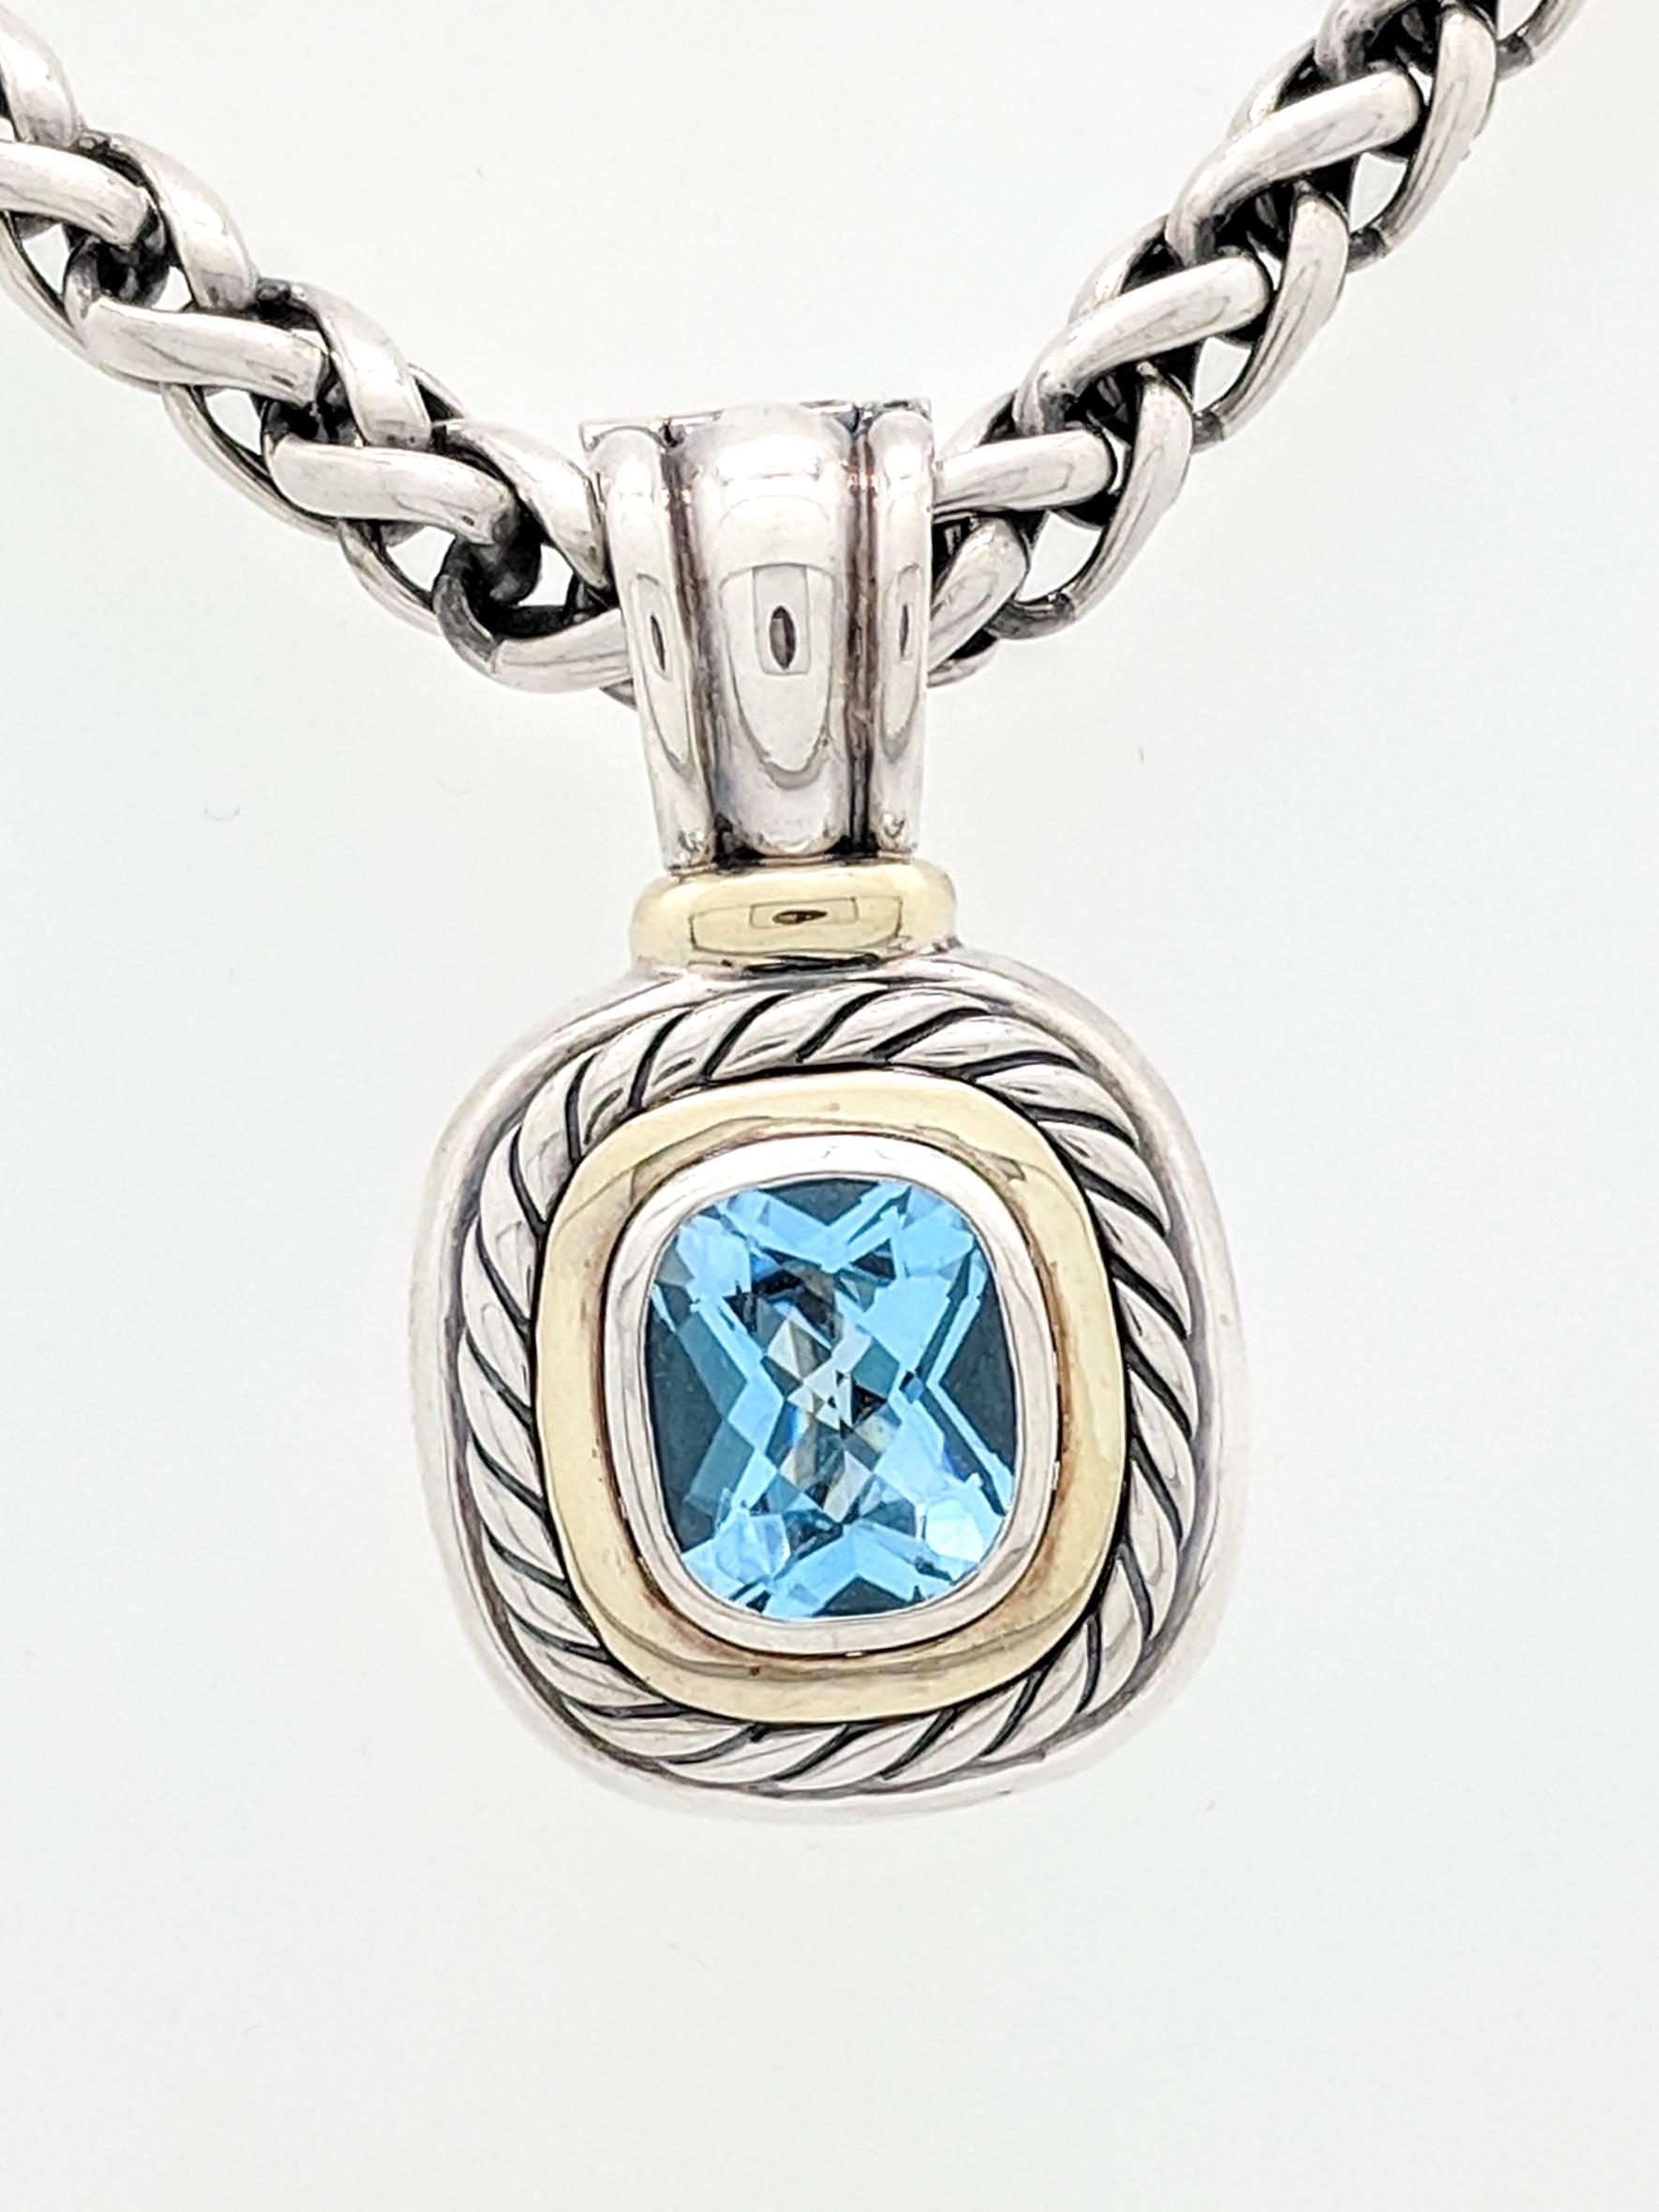 David Yurman Two Tone Blue Topaz Albion Pendant & Necklace

You are viewing an Authentic David Yurman Blue Topaz Albion Pendant Enhancer on DY Wheat Necklace featured in Two Tone, Sterling Silver & 14k yellow gold. This blue topaz enhancer pendant